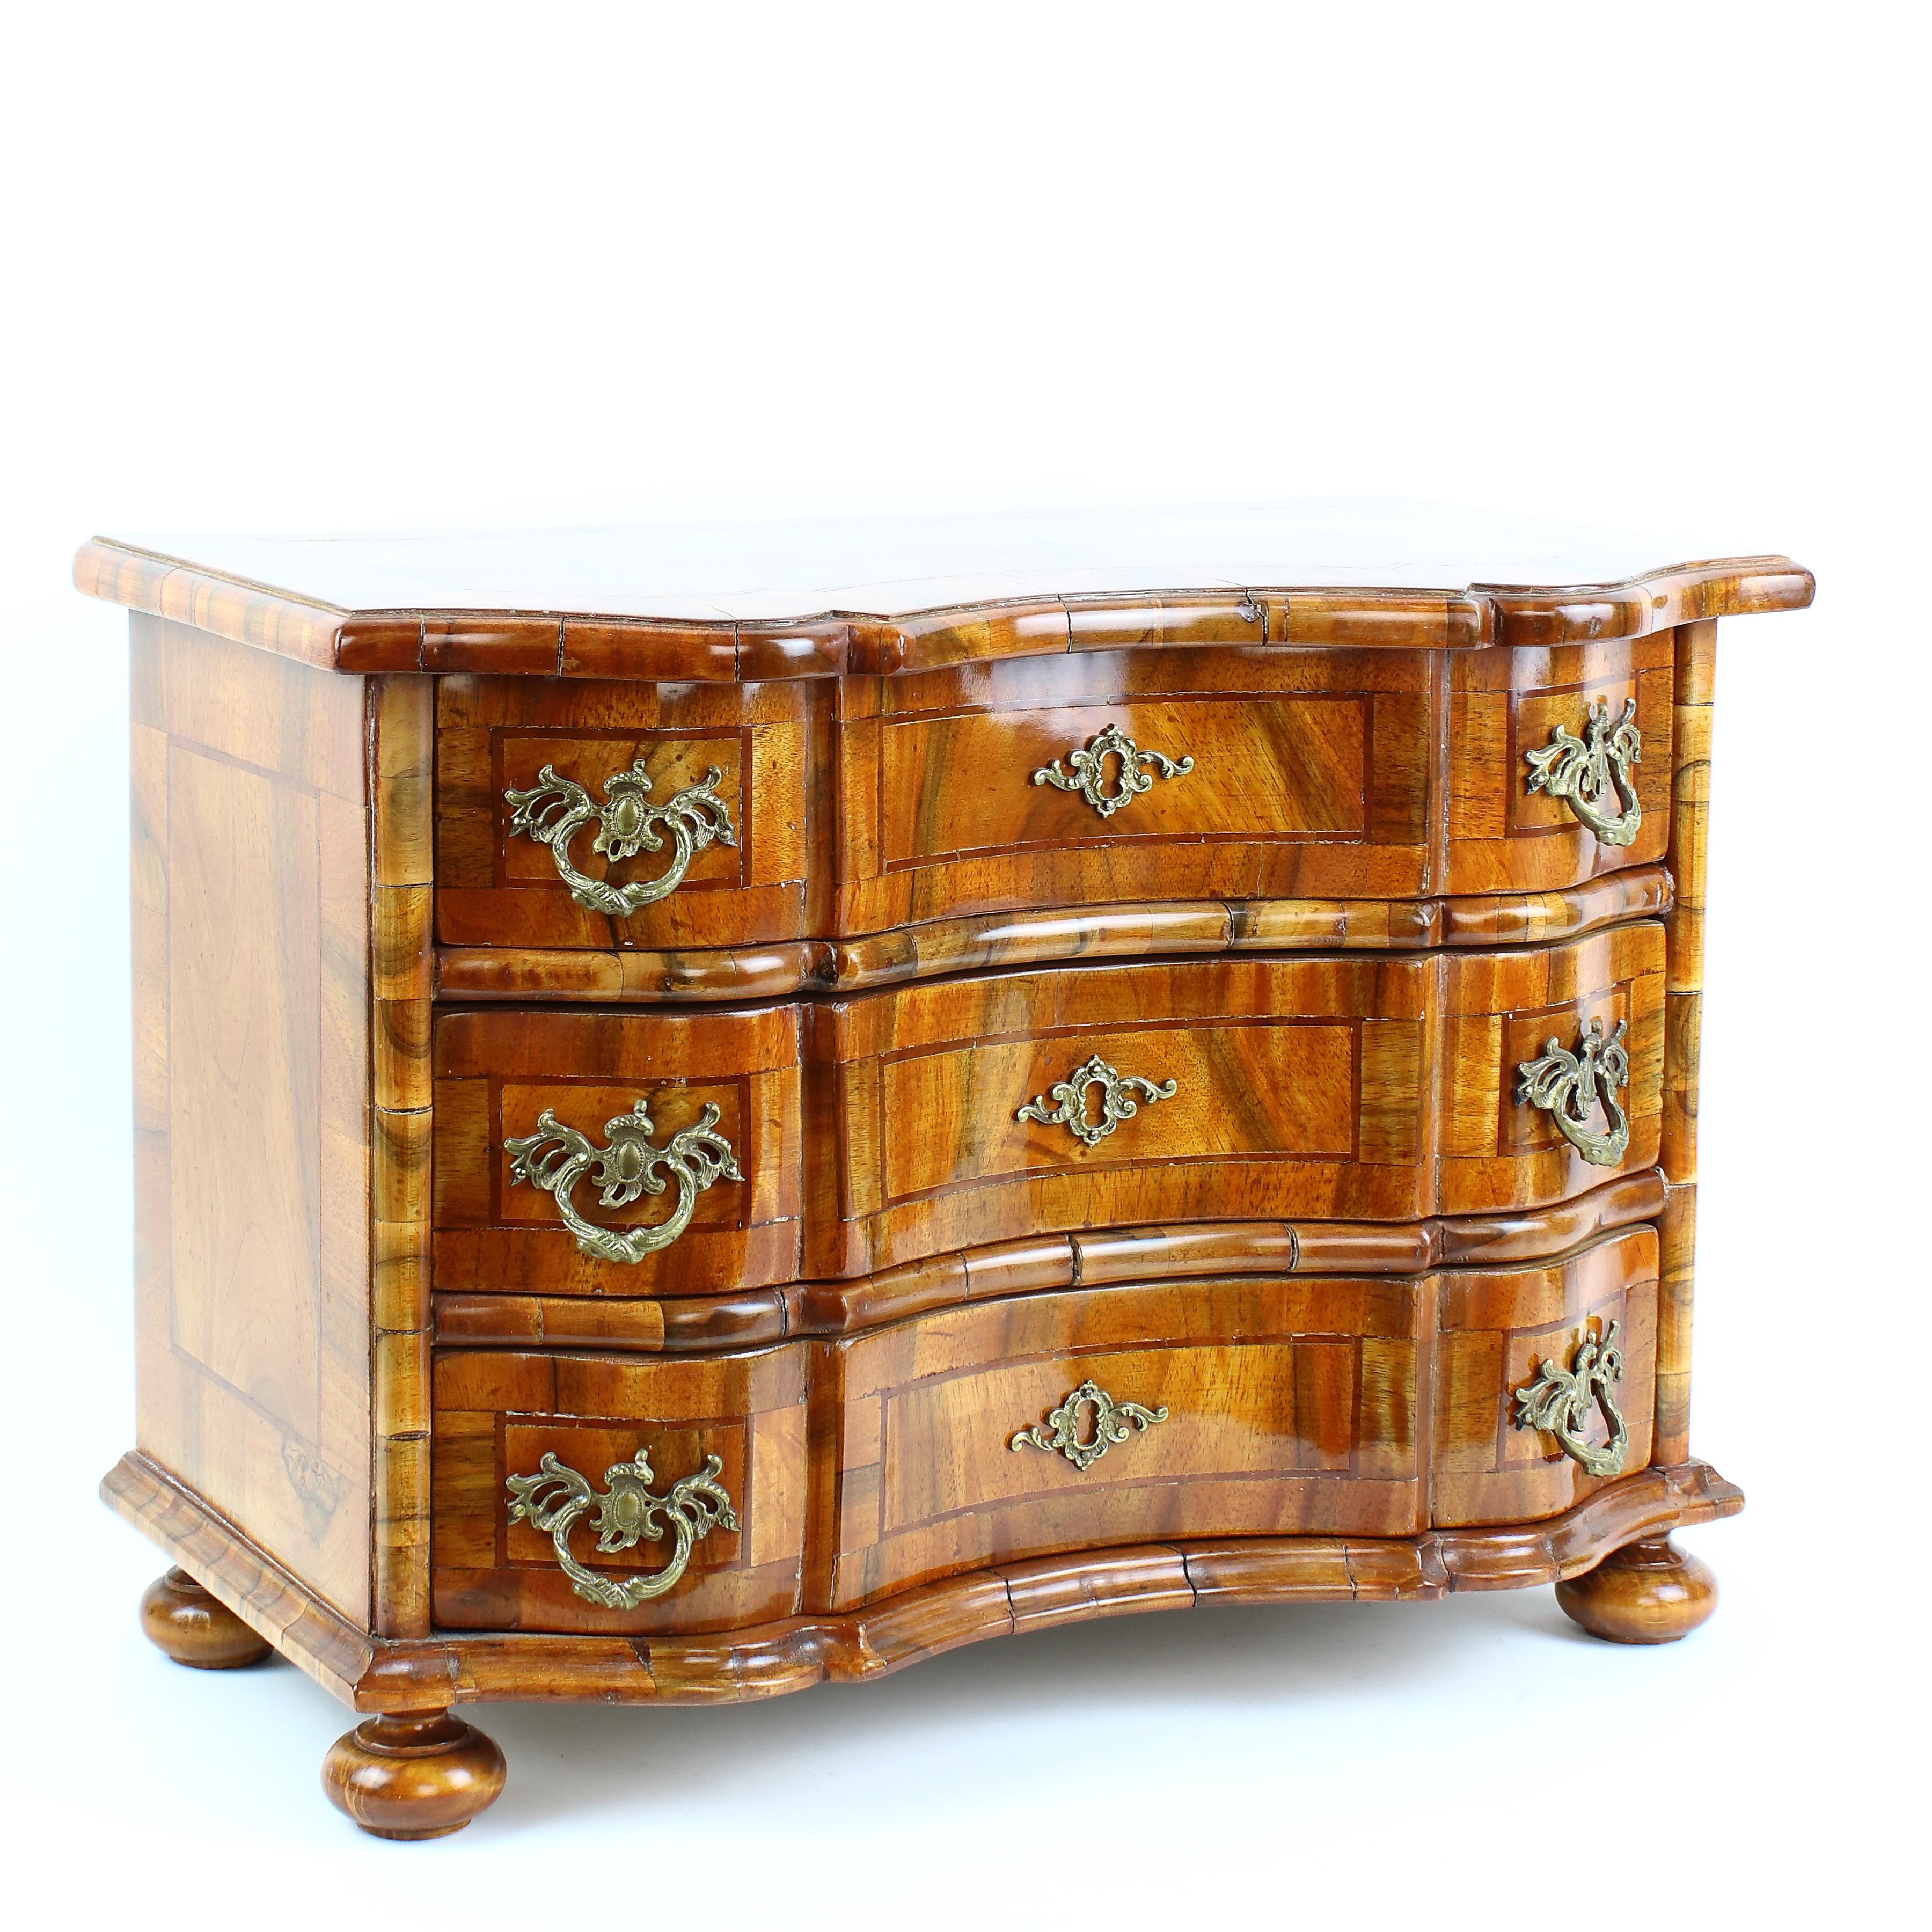 20th Century German Saxonian Baroque Style Walnut Veneer Chest of Drawers or Commode